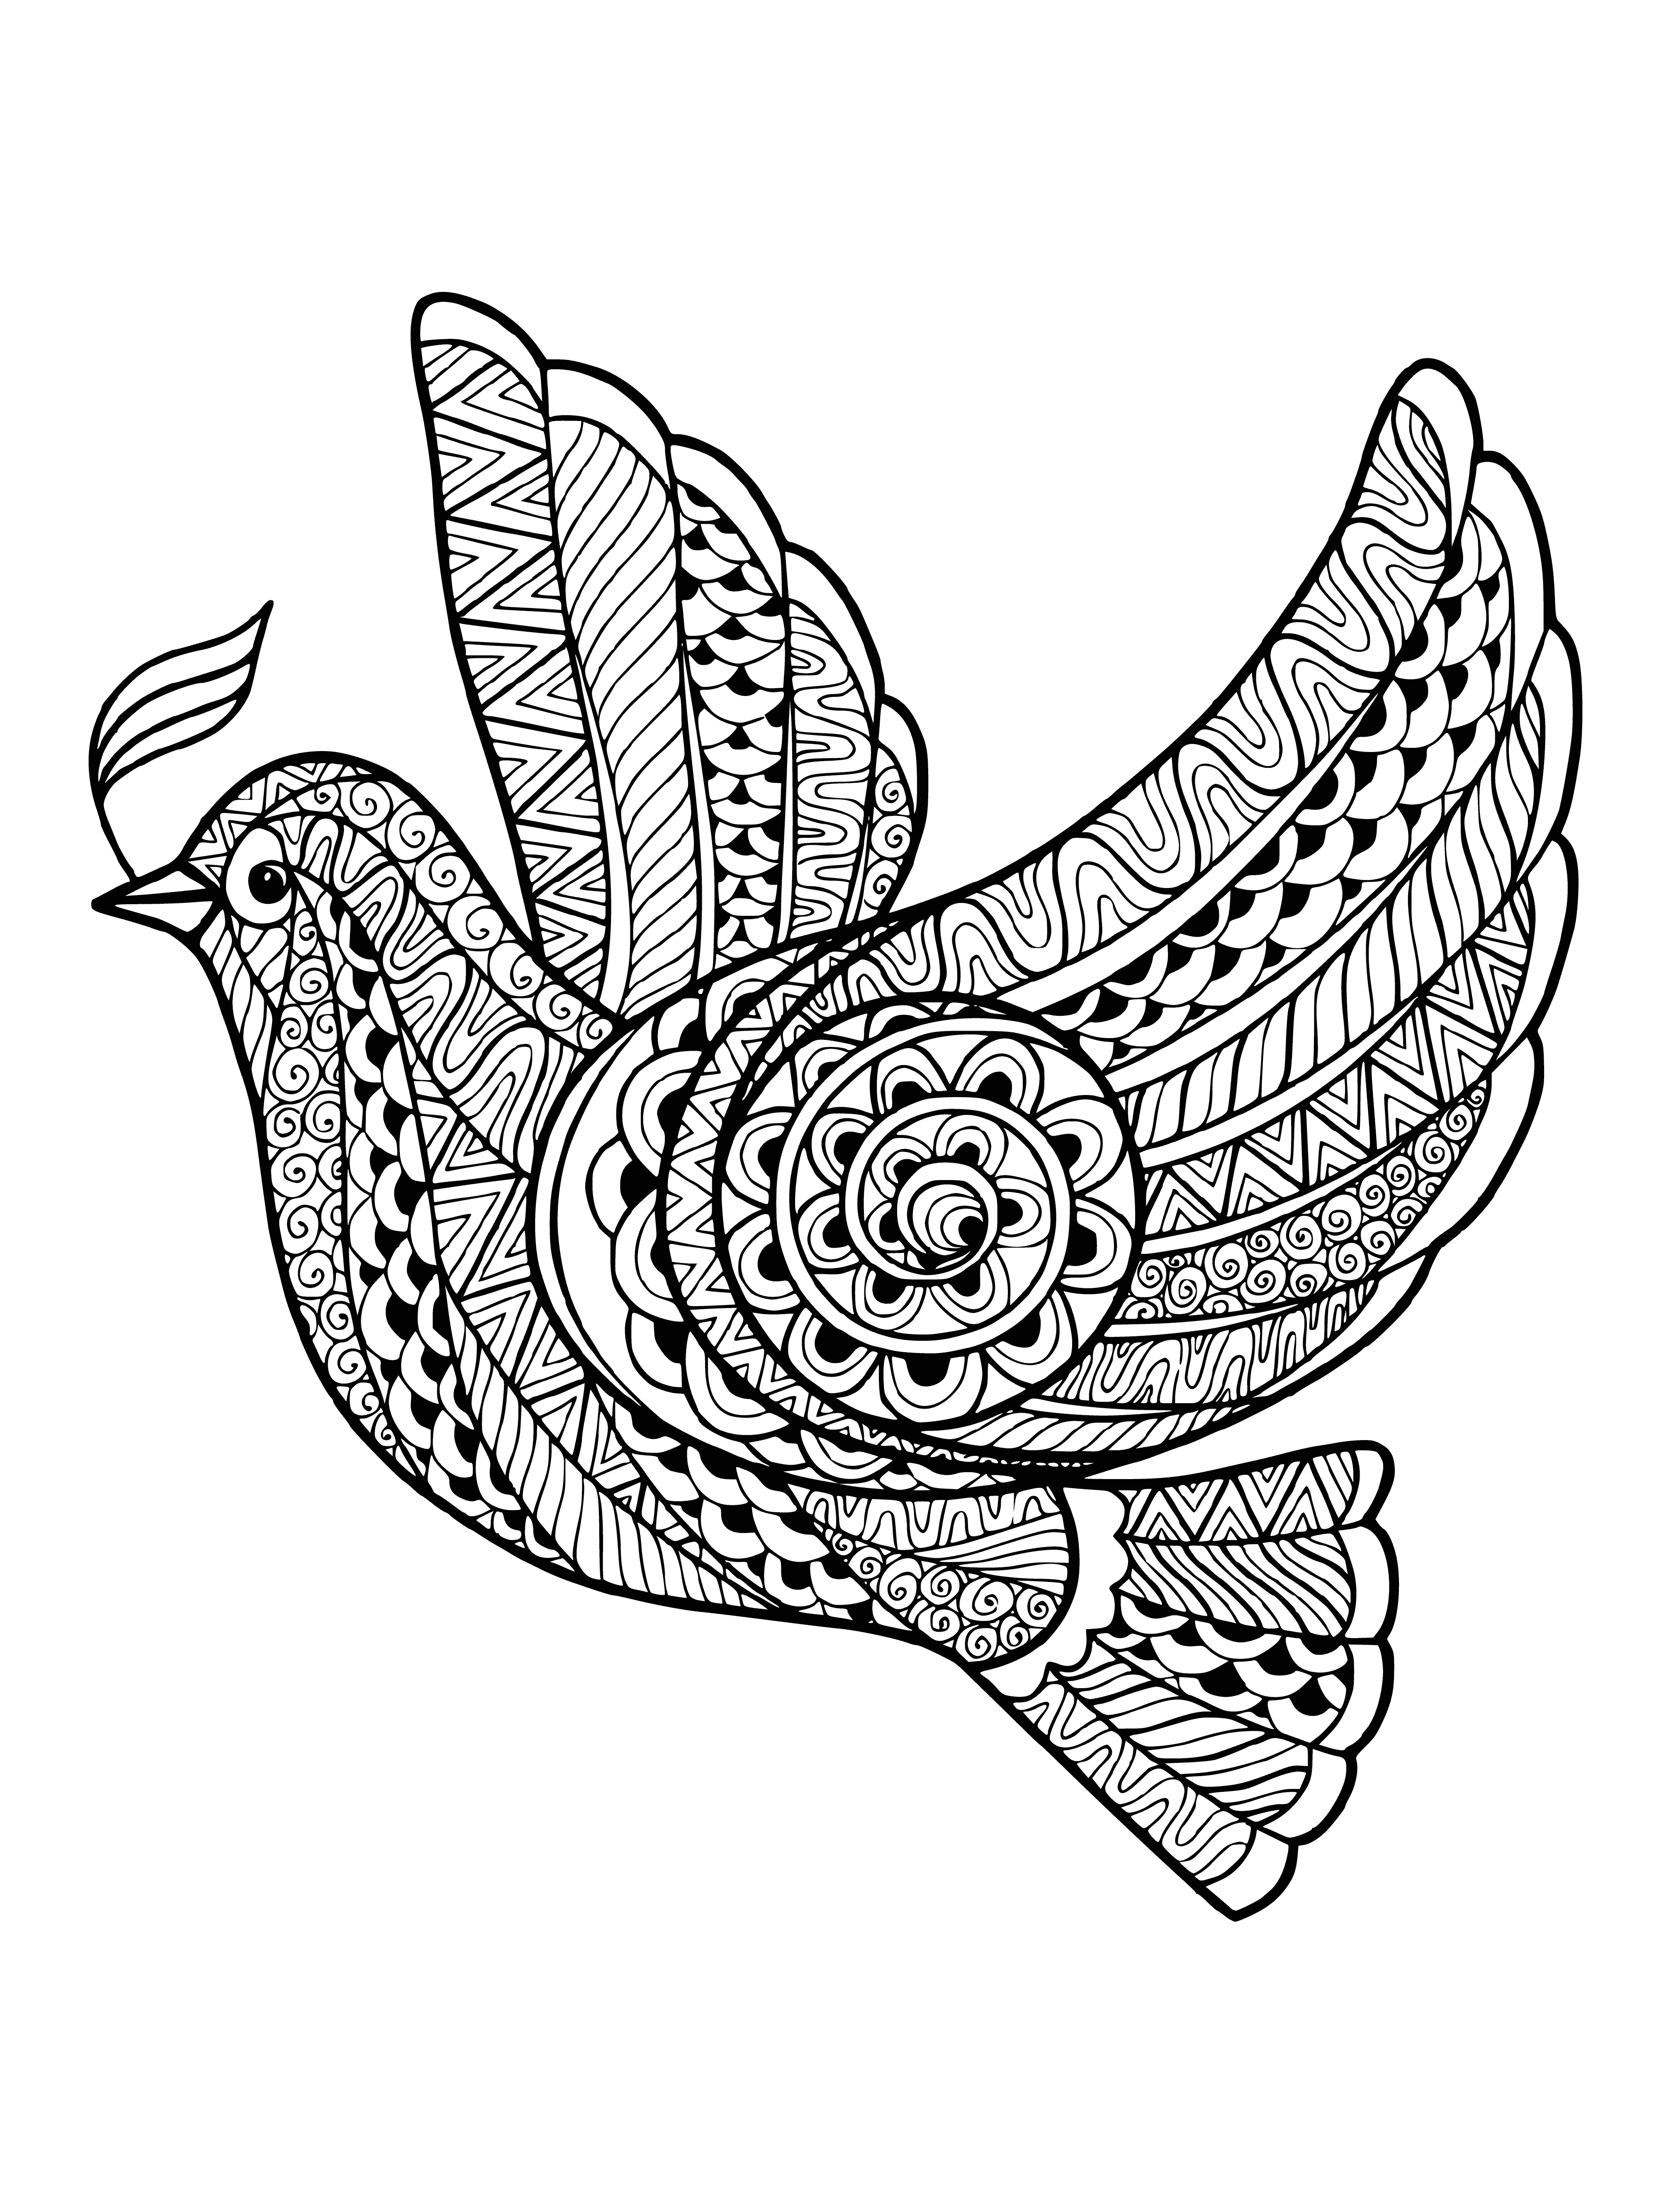 coloring page: Pigeons are calming birds typically with gray and white. Often used in coloring pages for relaxation, destressing, and calming.